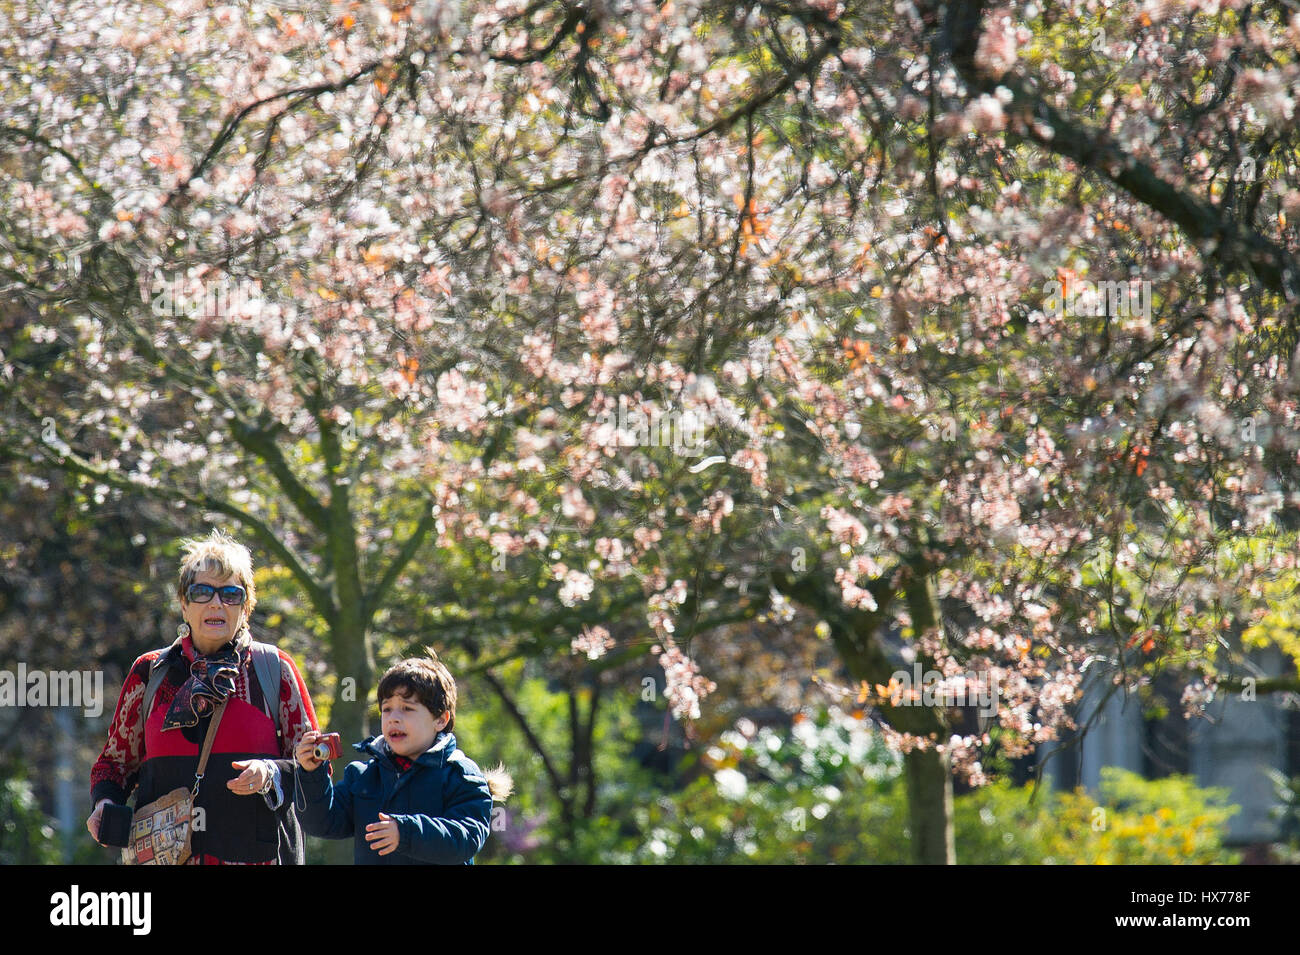 People walk beneath trees in blossom in St Jame's Park, London Stock ...